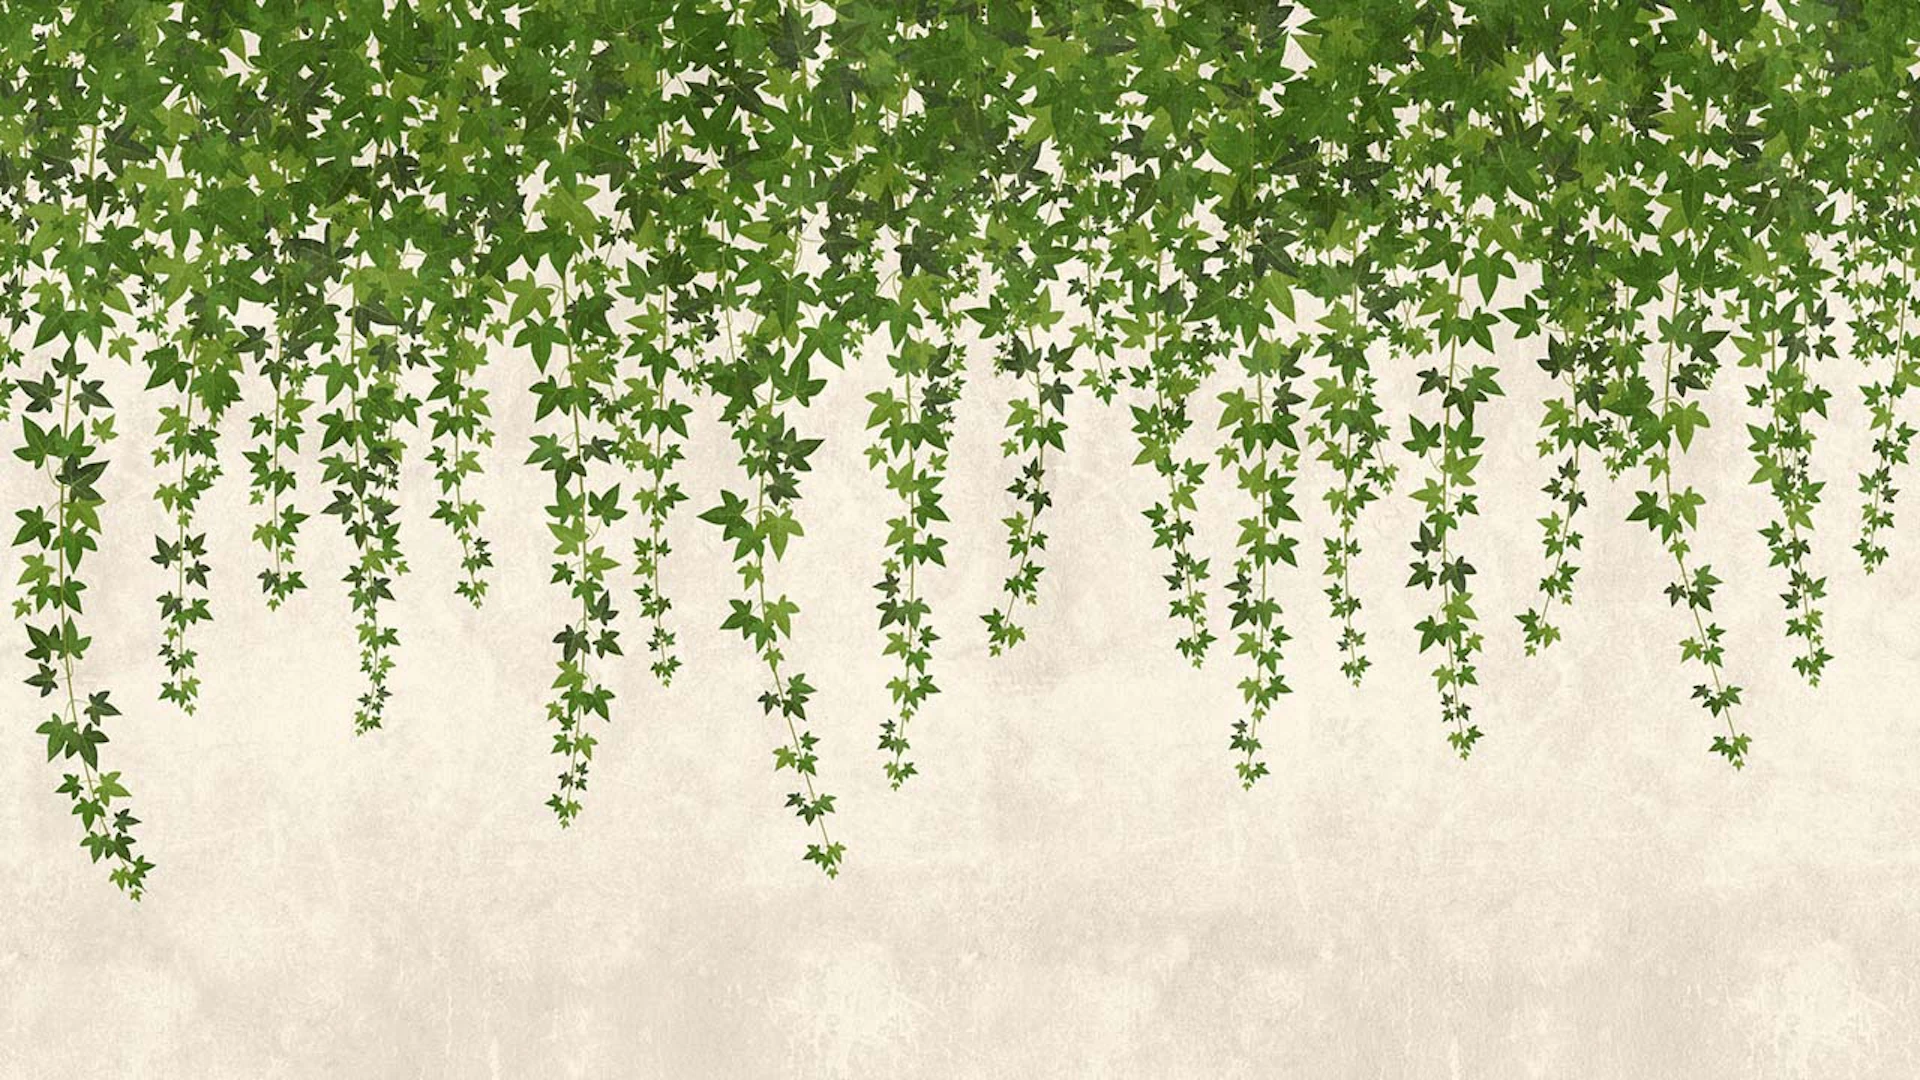 Vinyl Wallpaper The Wall Flowers & Nature Vintage Green 391